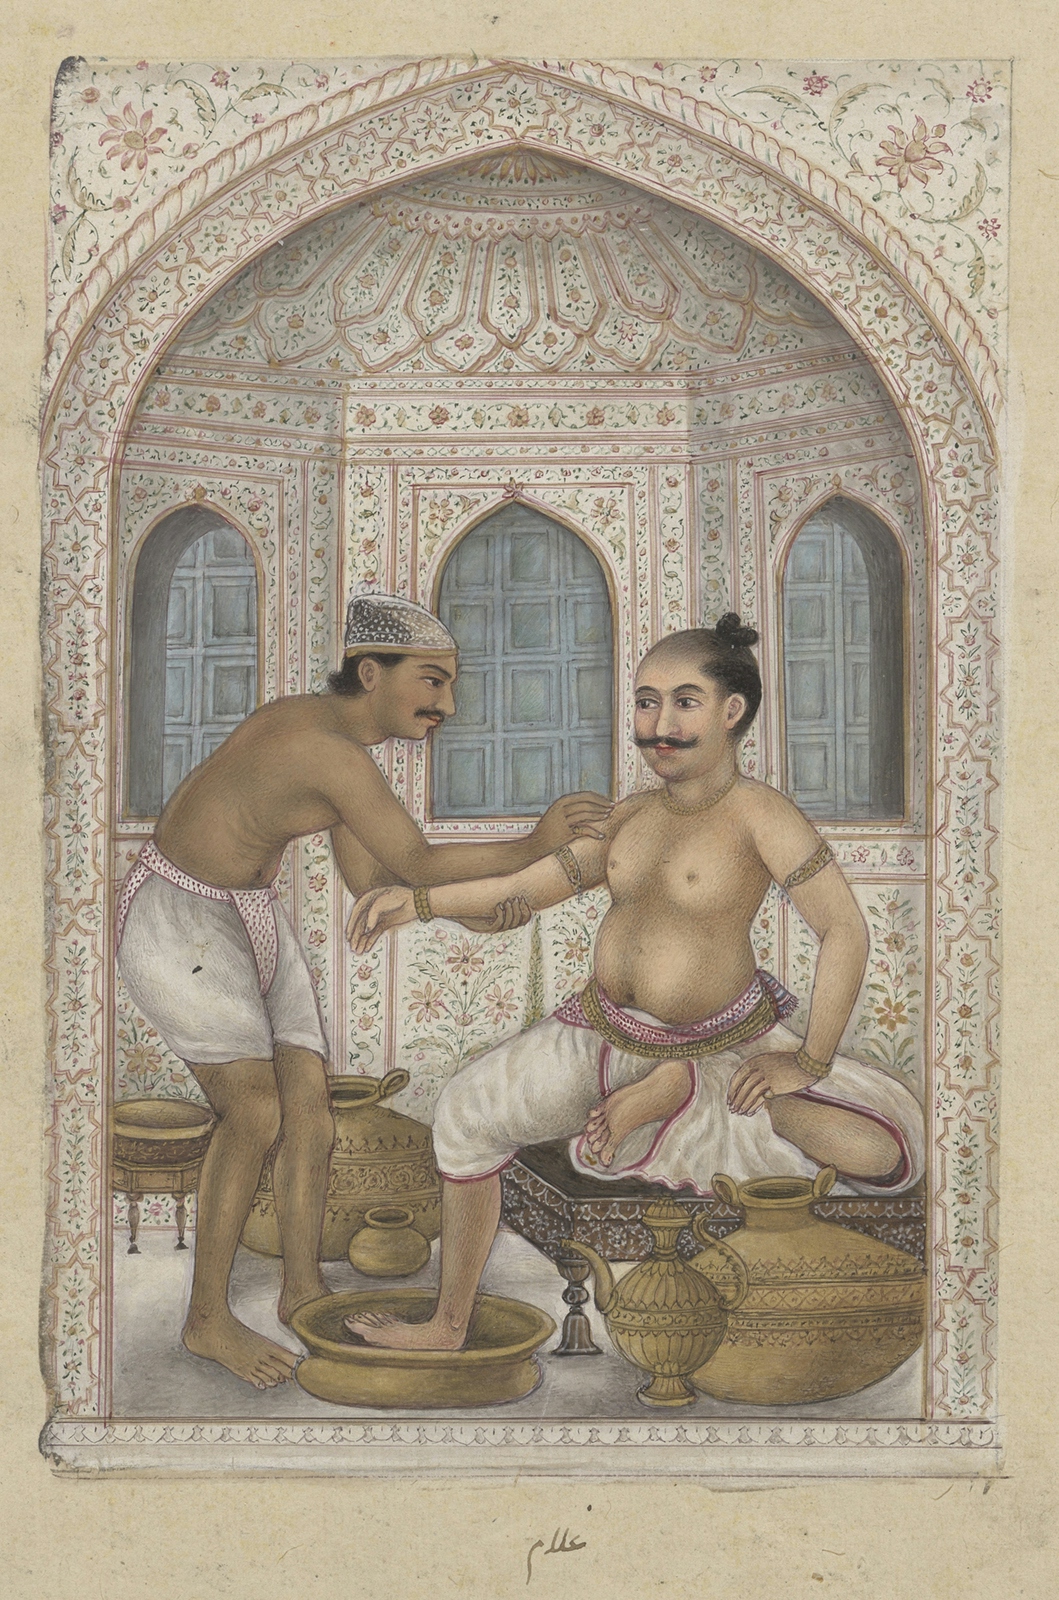 A painting showing two men, one standing, one seated, both bare chested. The standing man is massaging the seated man's arm.